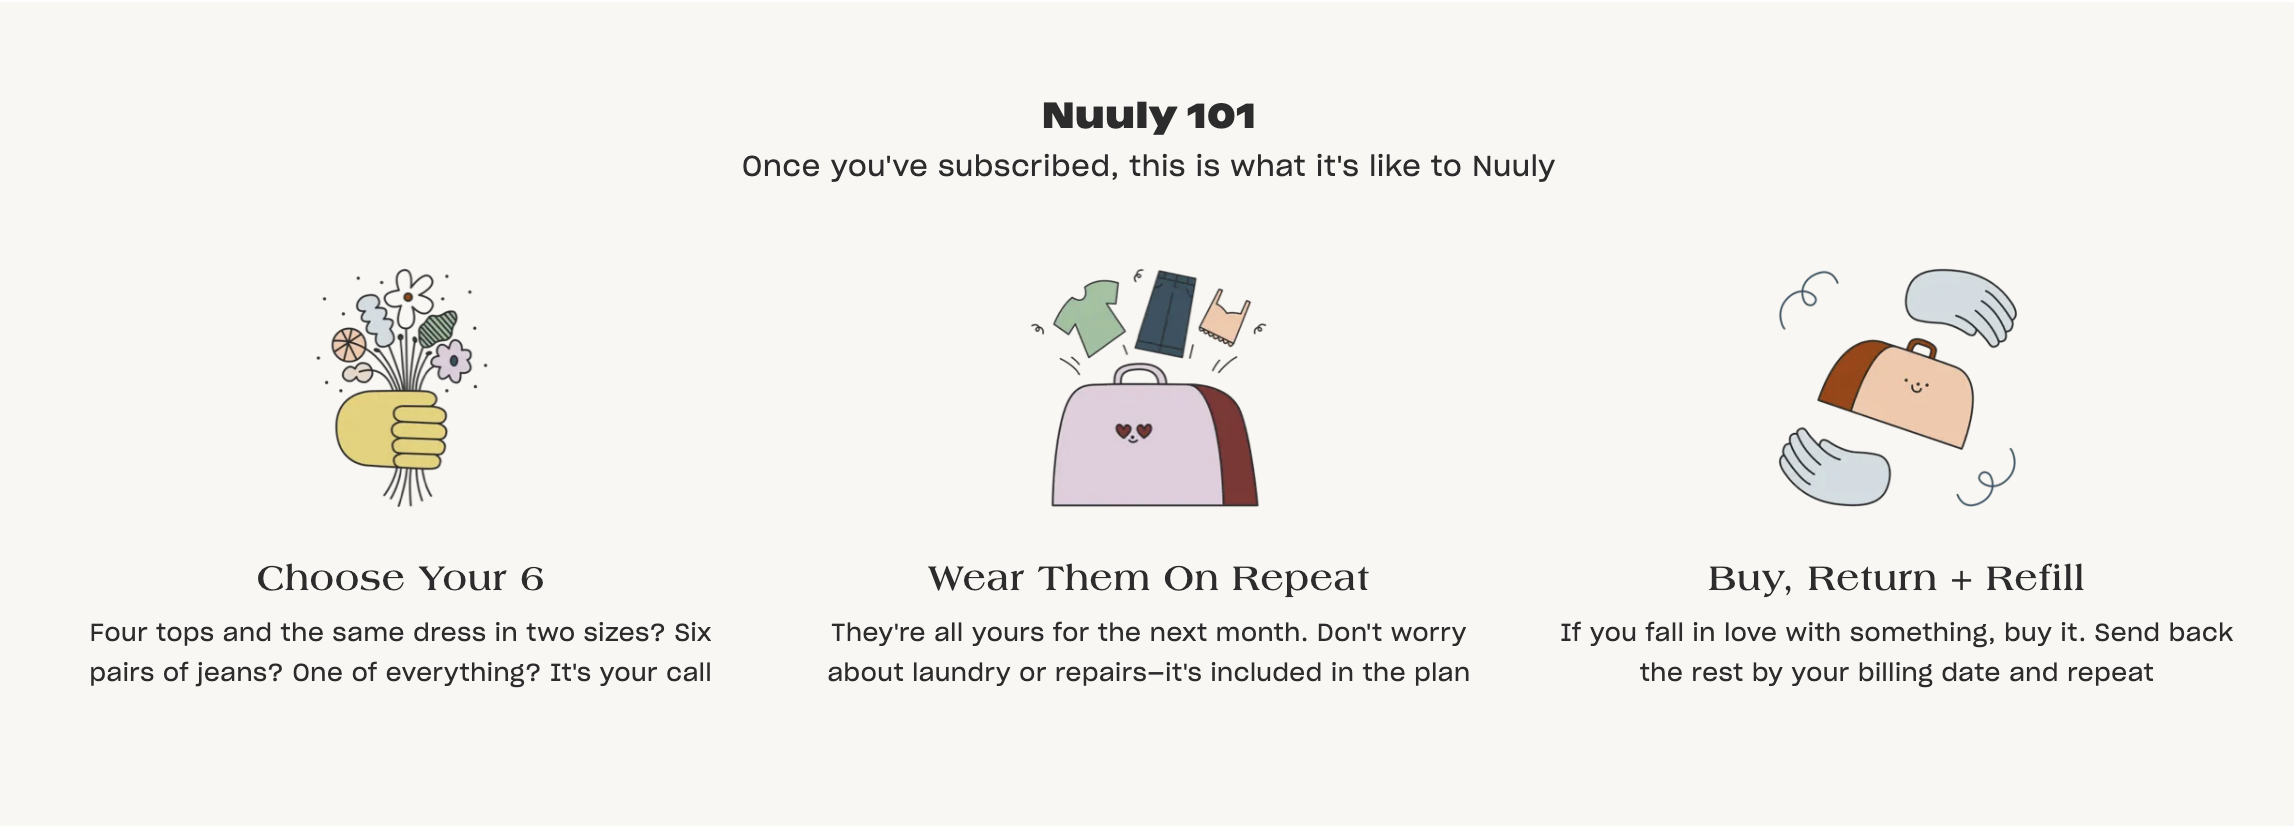 Nuuly Clothing Rental process screenshot from the Nuuly website